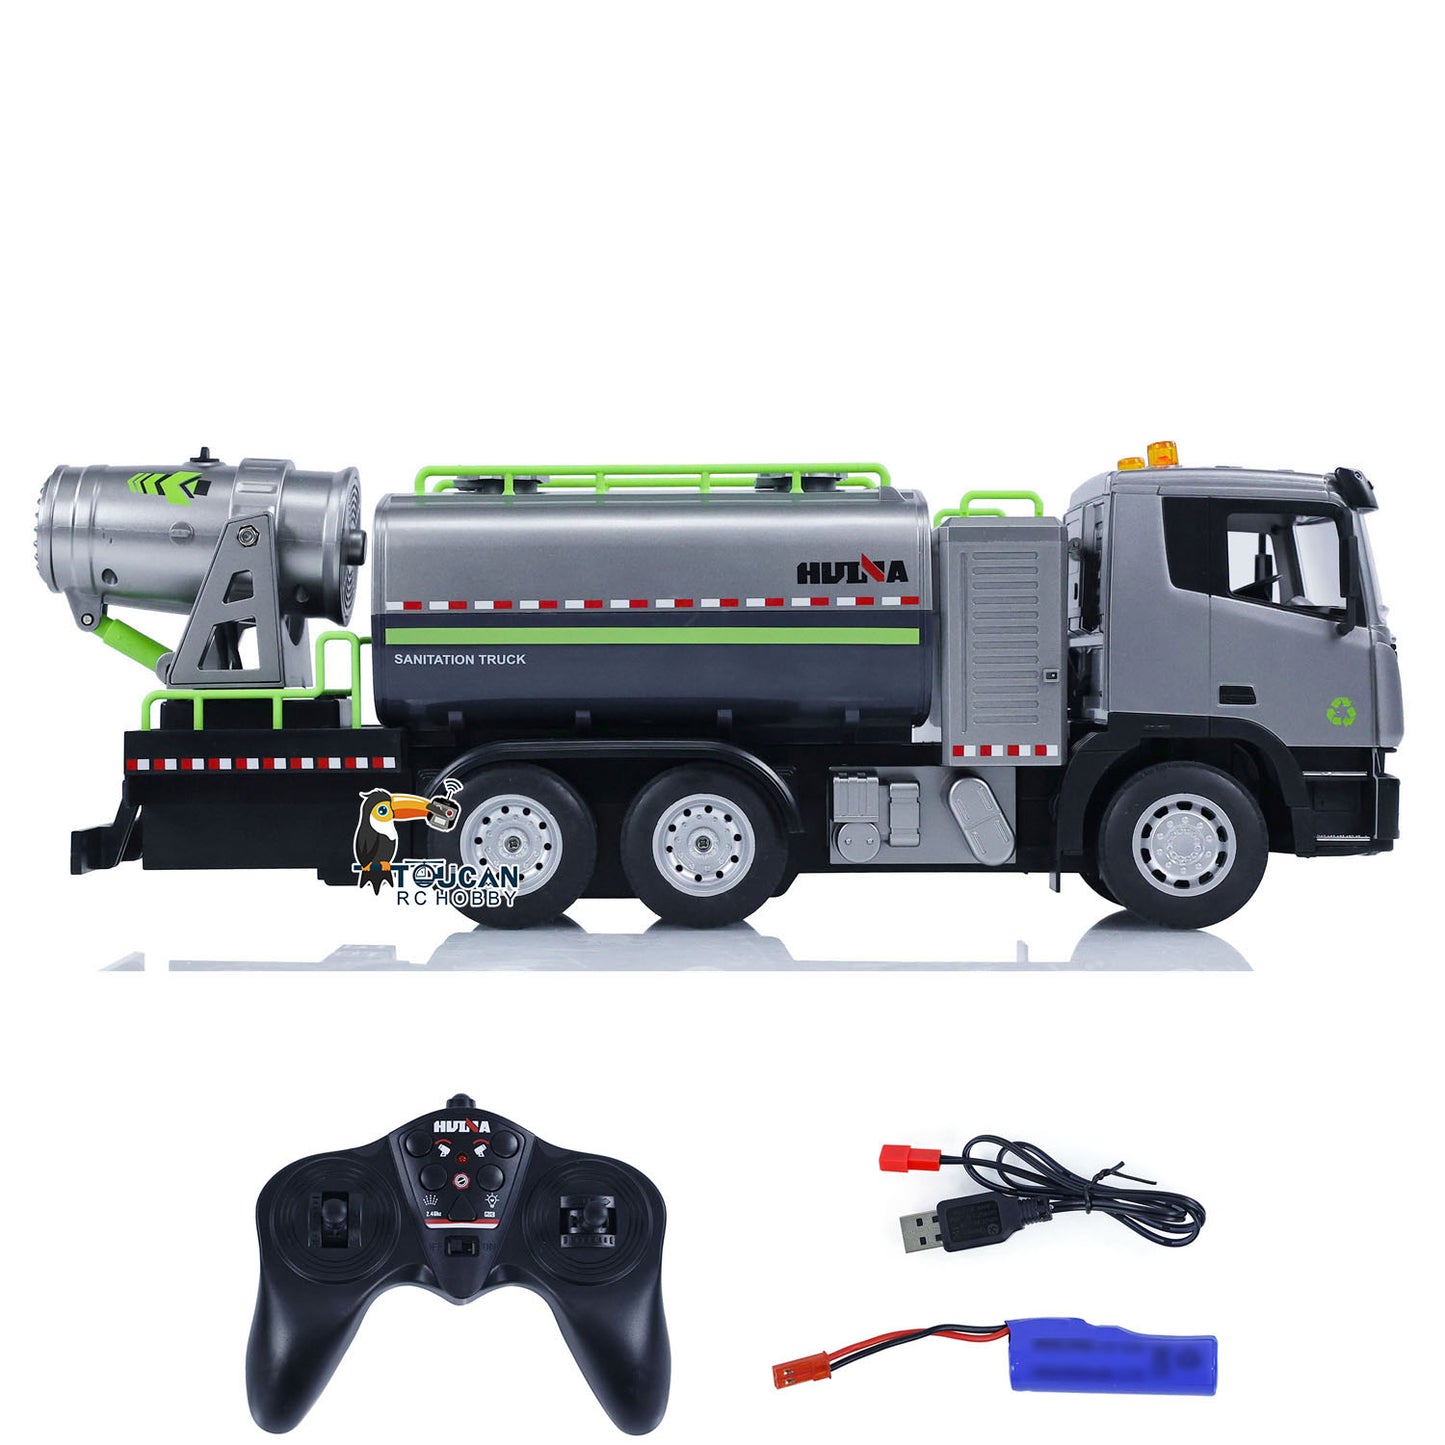 1/18 HUINA 1316 RC Spray Fog Cannon Remote Control Truck 9CH Eletric Car Hobby Model Toys Gifts for Children Adults